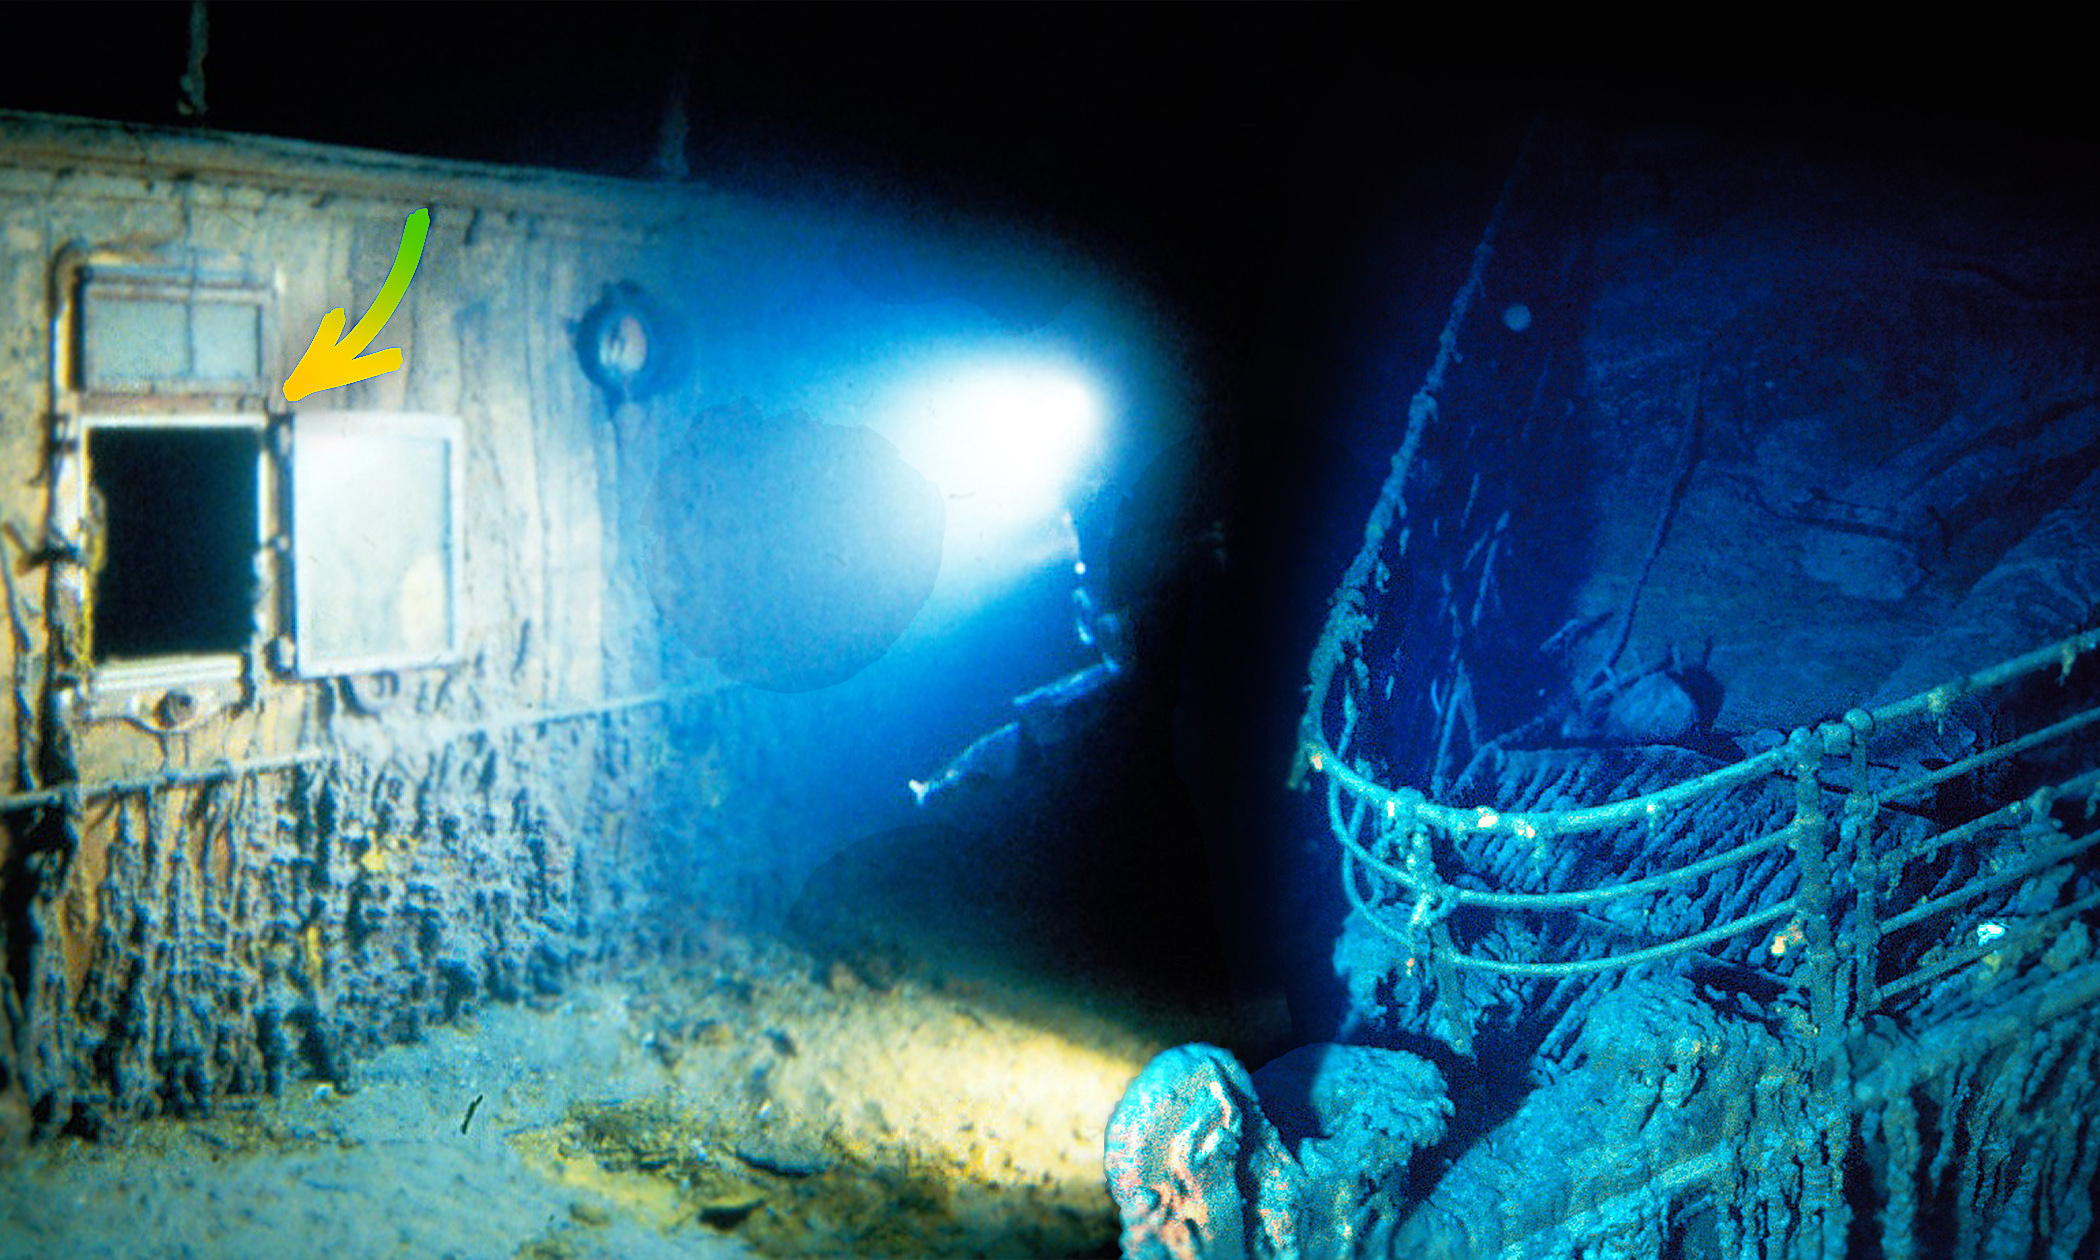 real pictures of the sunken titanic